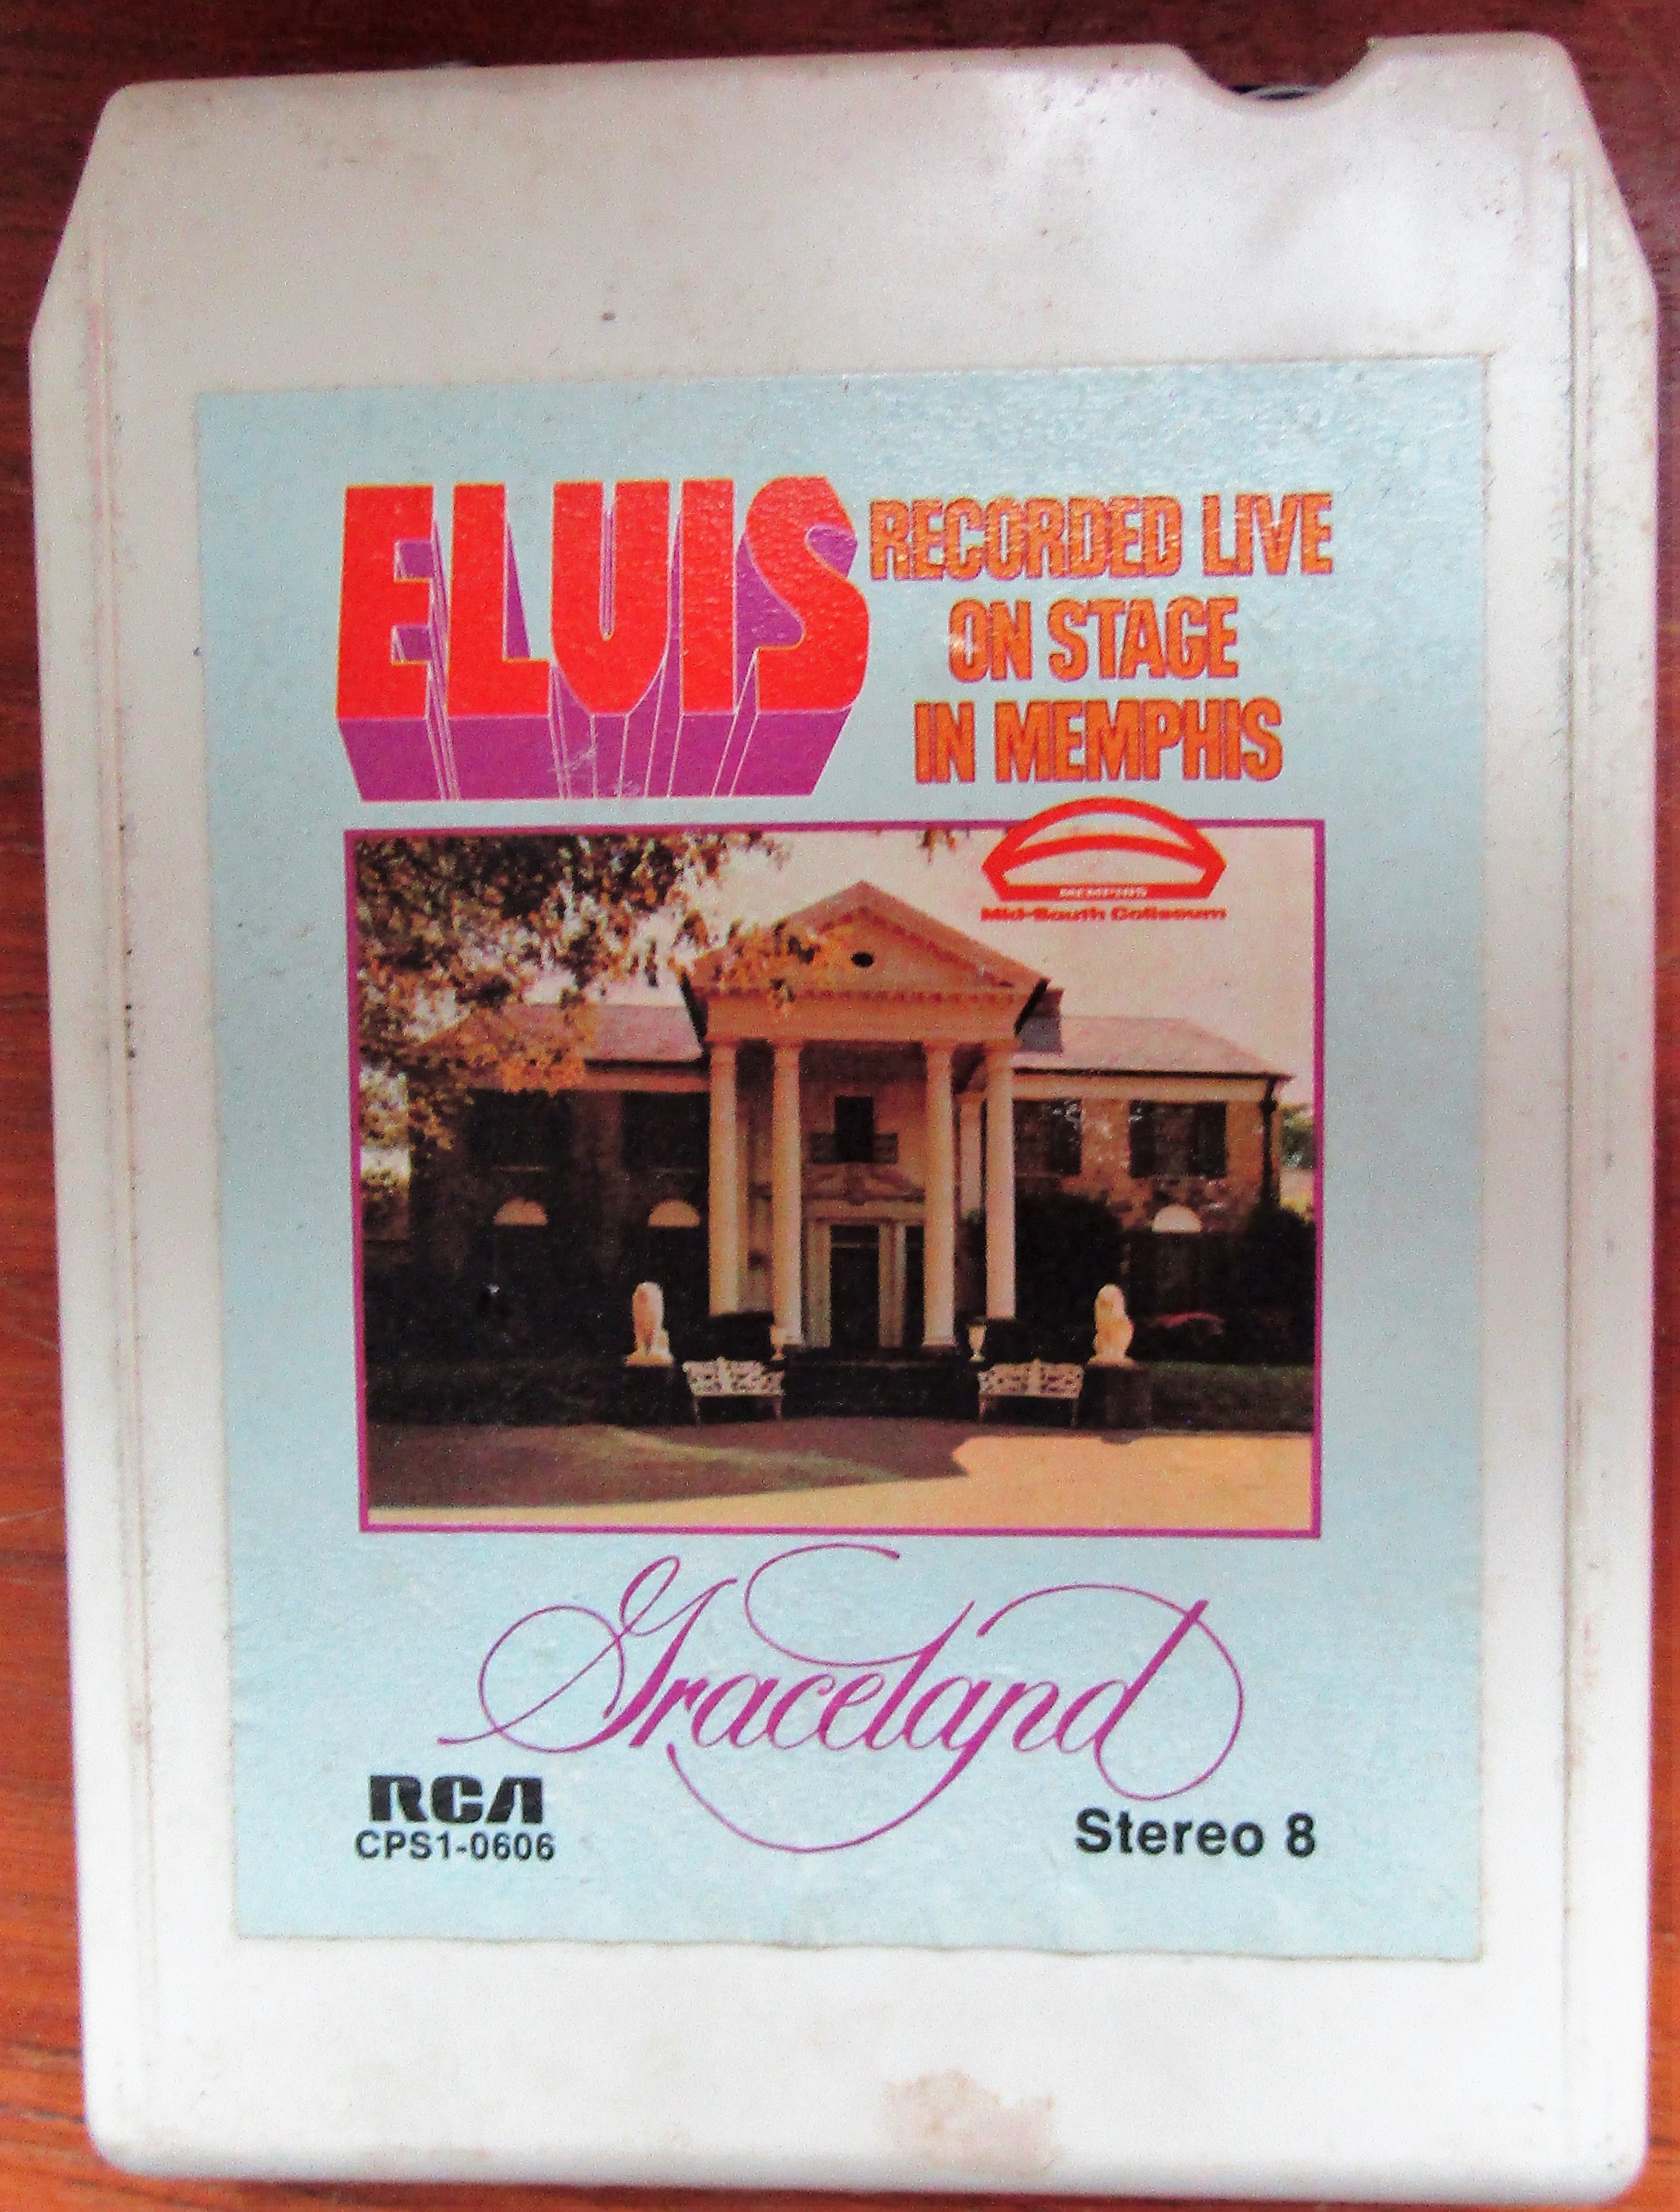 Elvis Recorded Live on Stage in Memphis